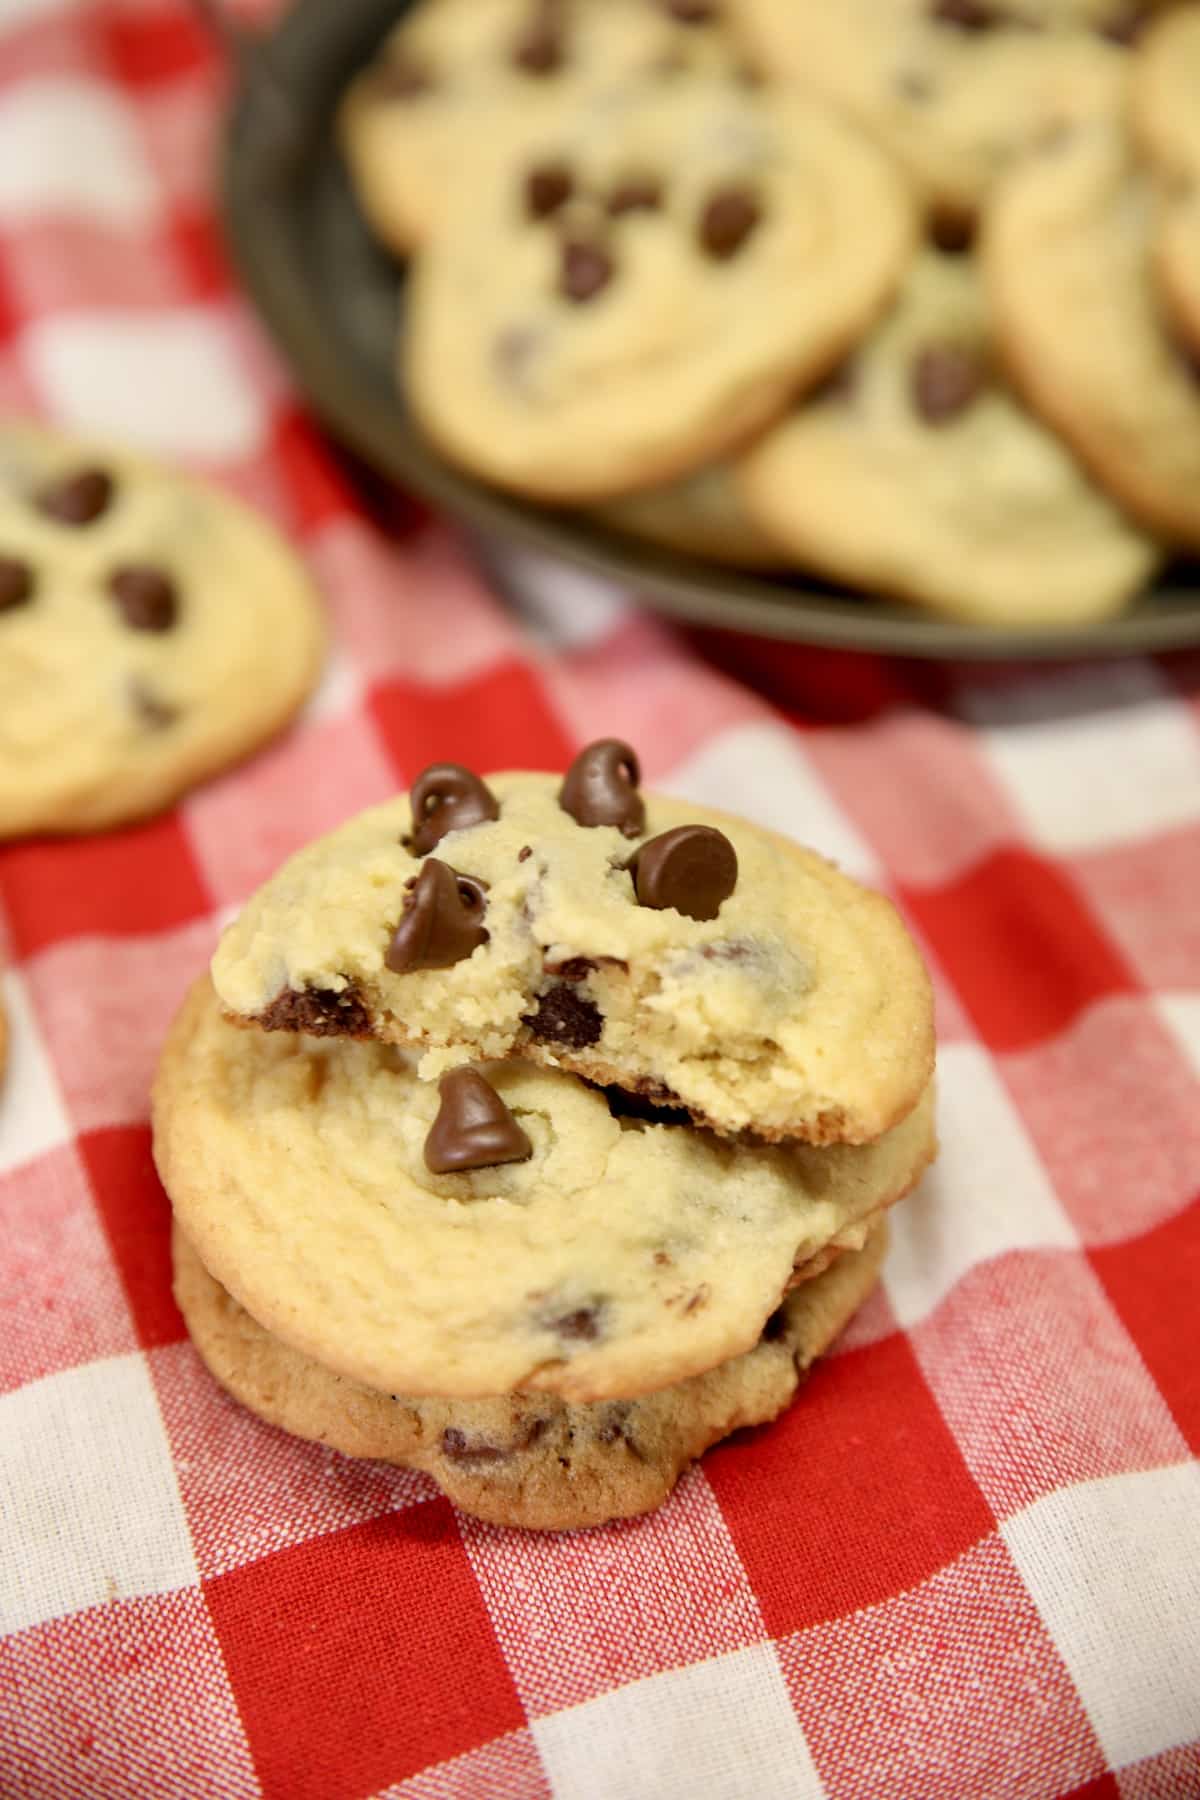 Chocolate chip cookies stacked and on a plate.